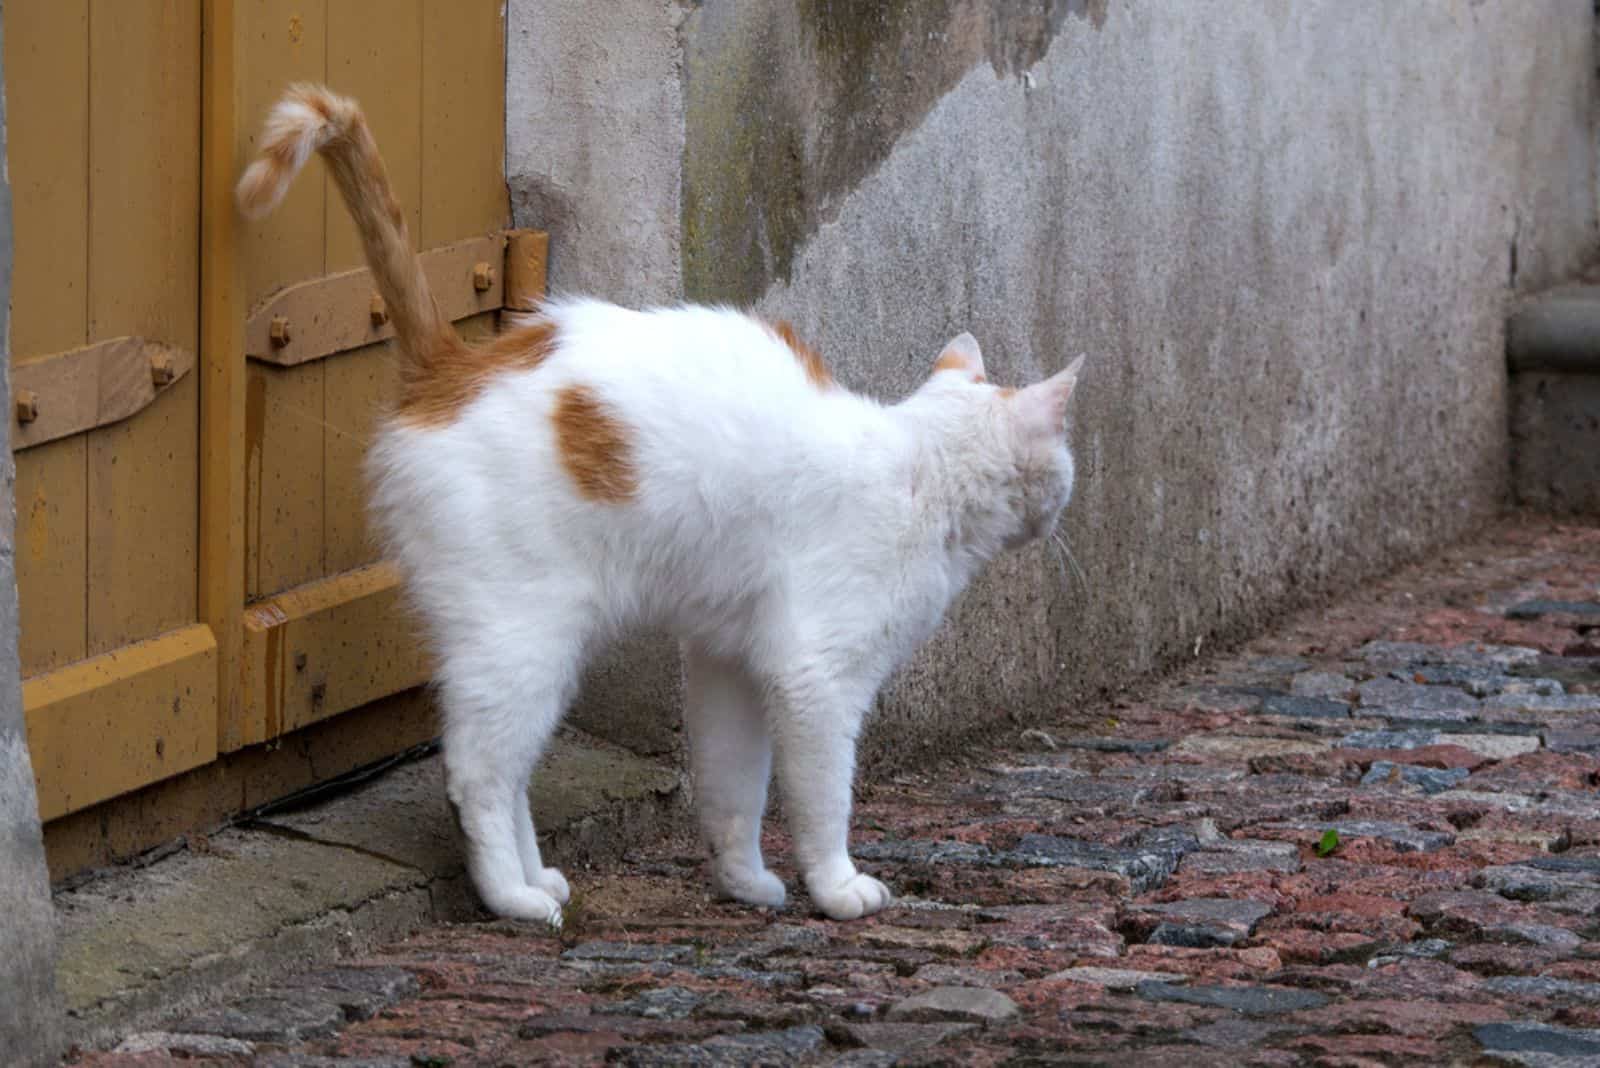 The white cat marks the territory